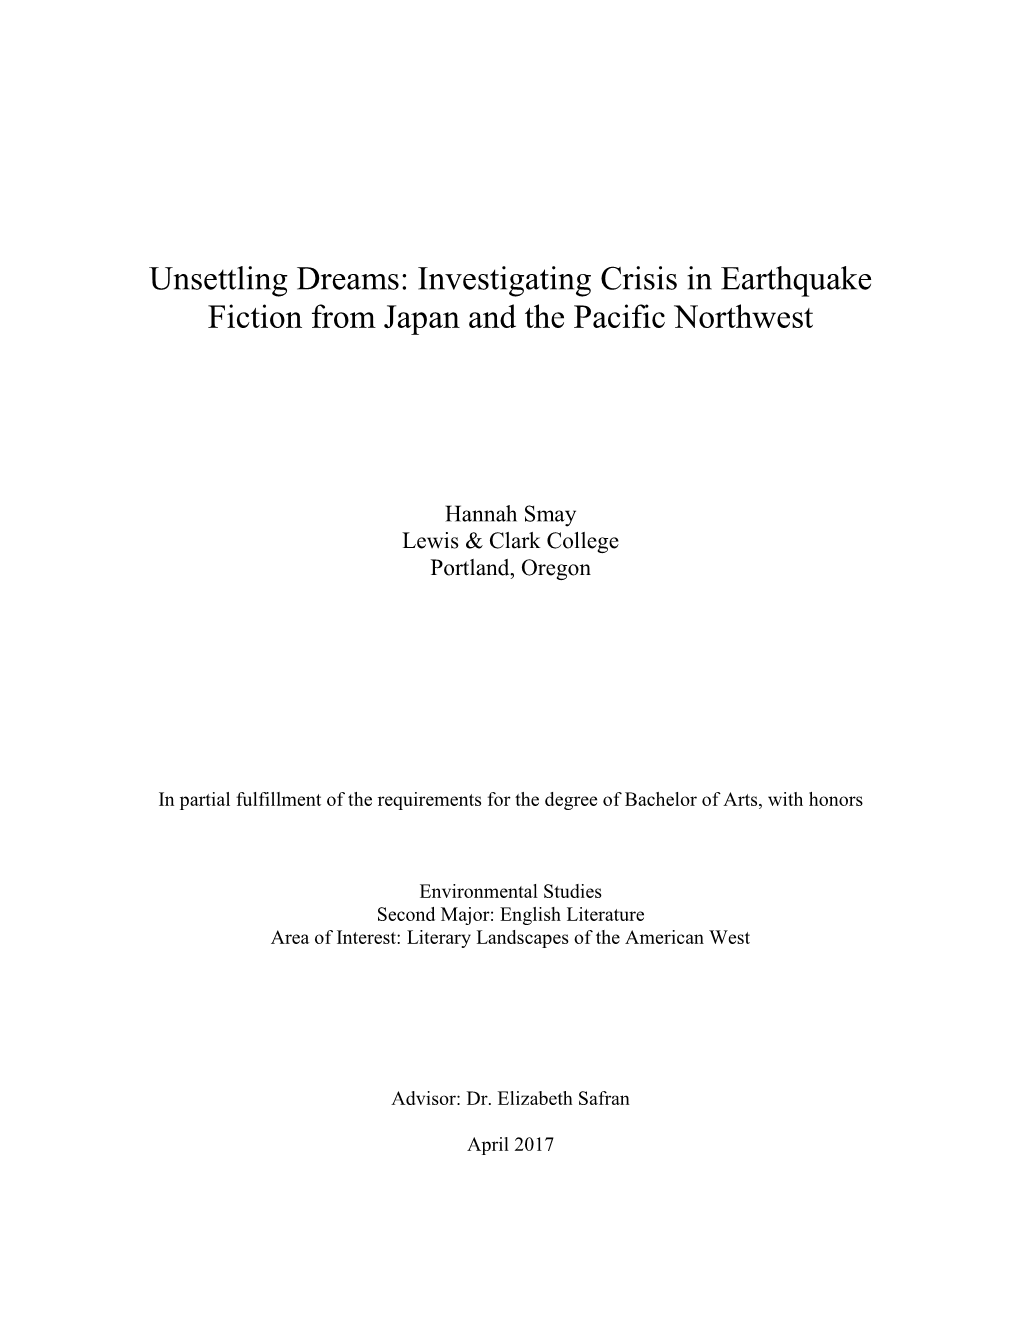 Unsettling Dreams: Investigating Crisis in Earthquake Fiction from Japan and the Pacific Northwest